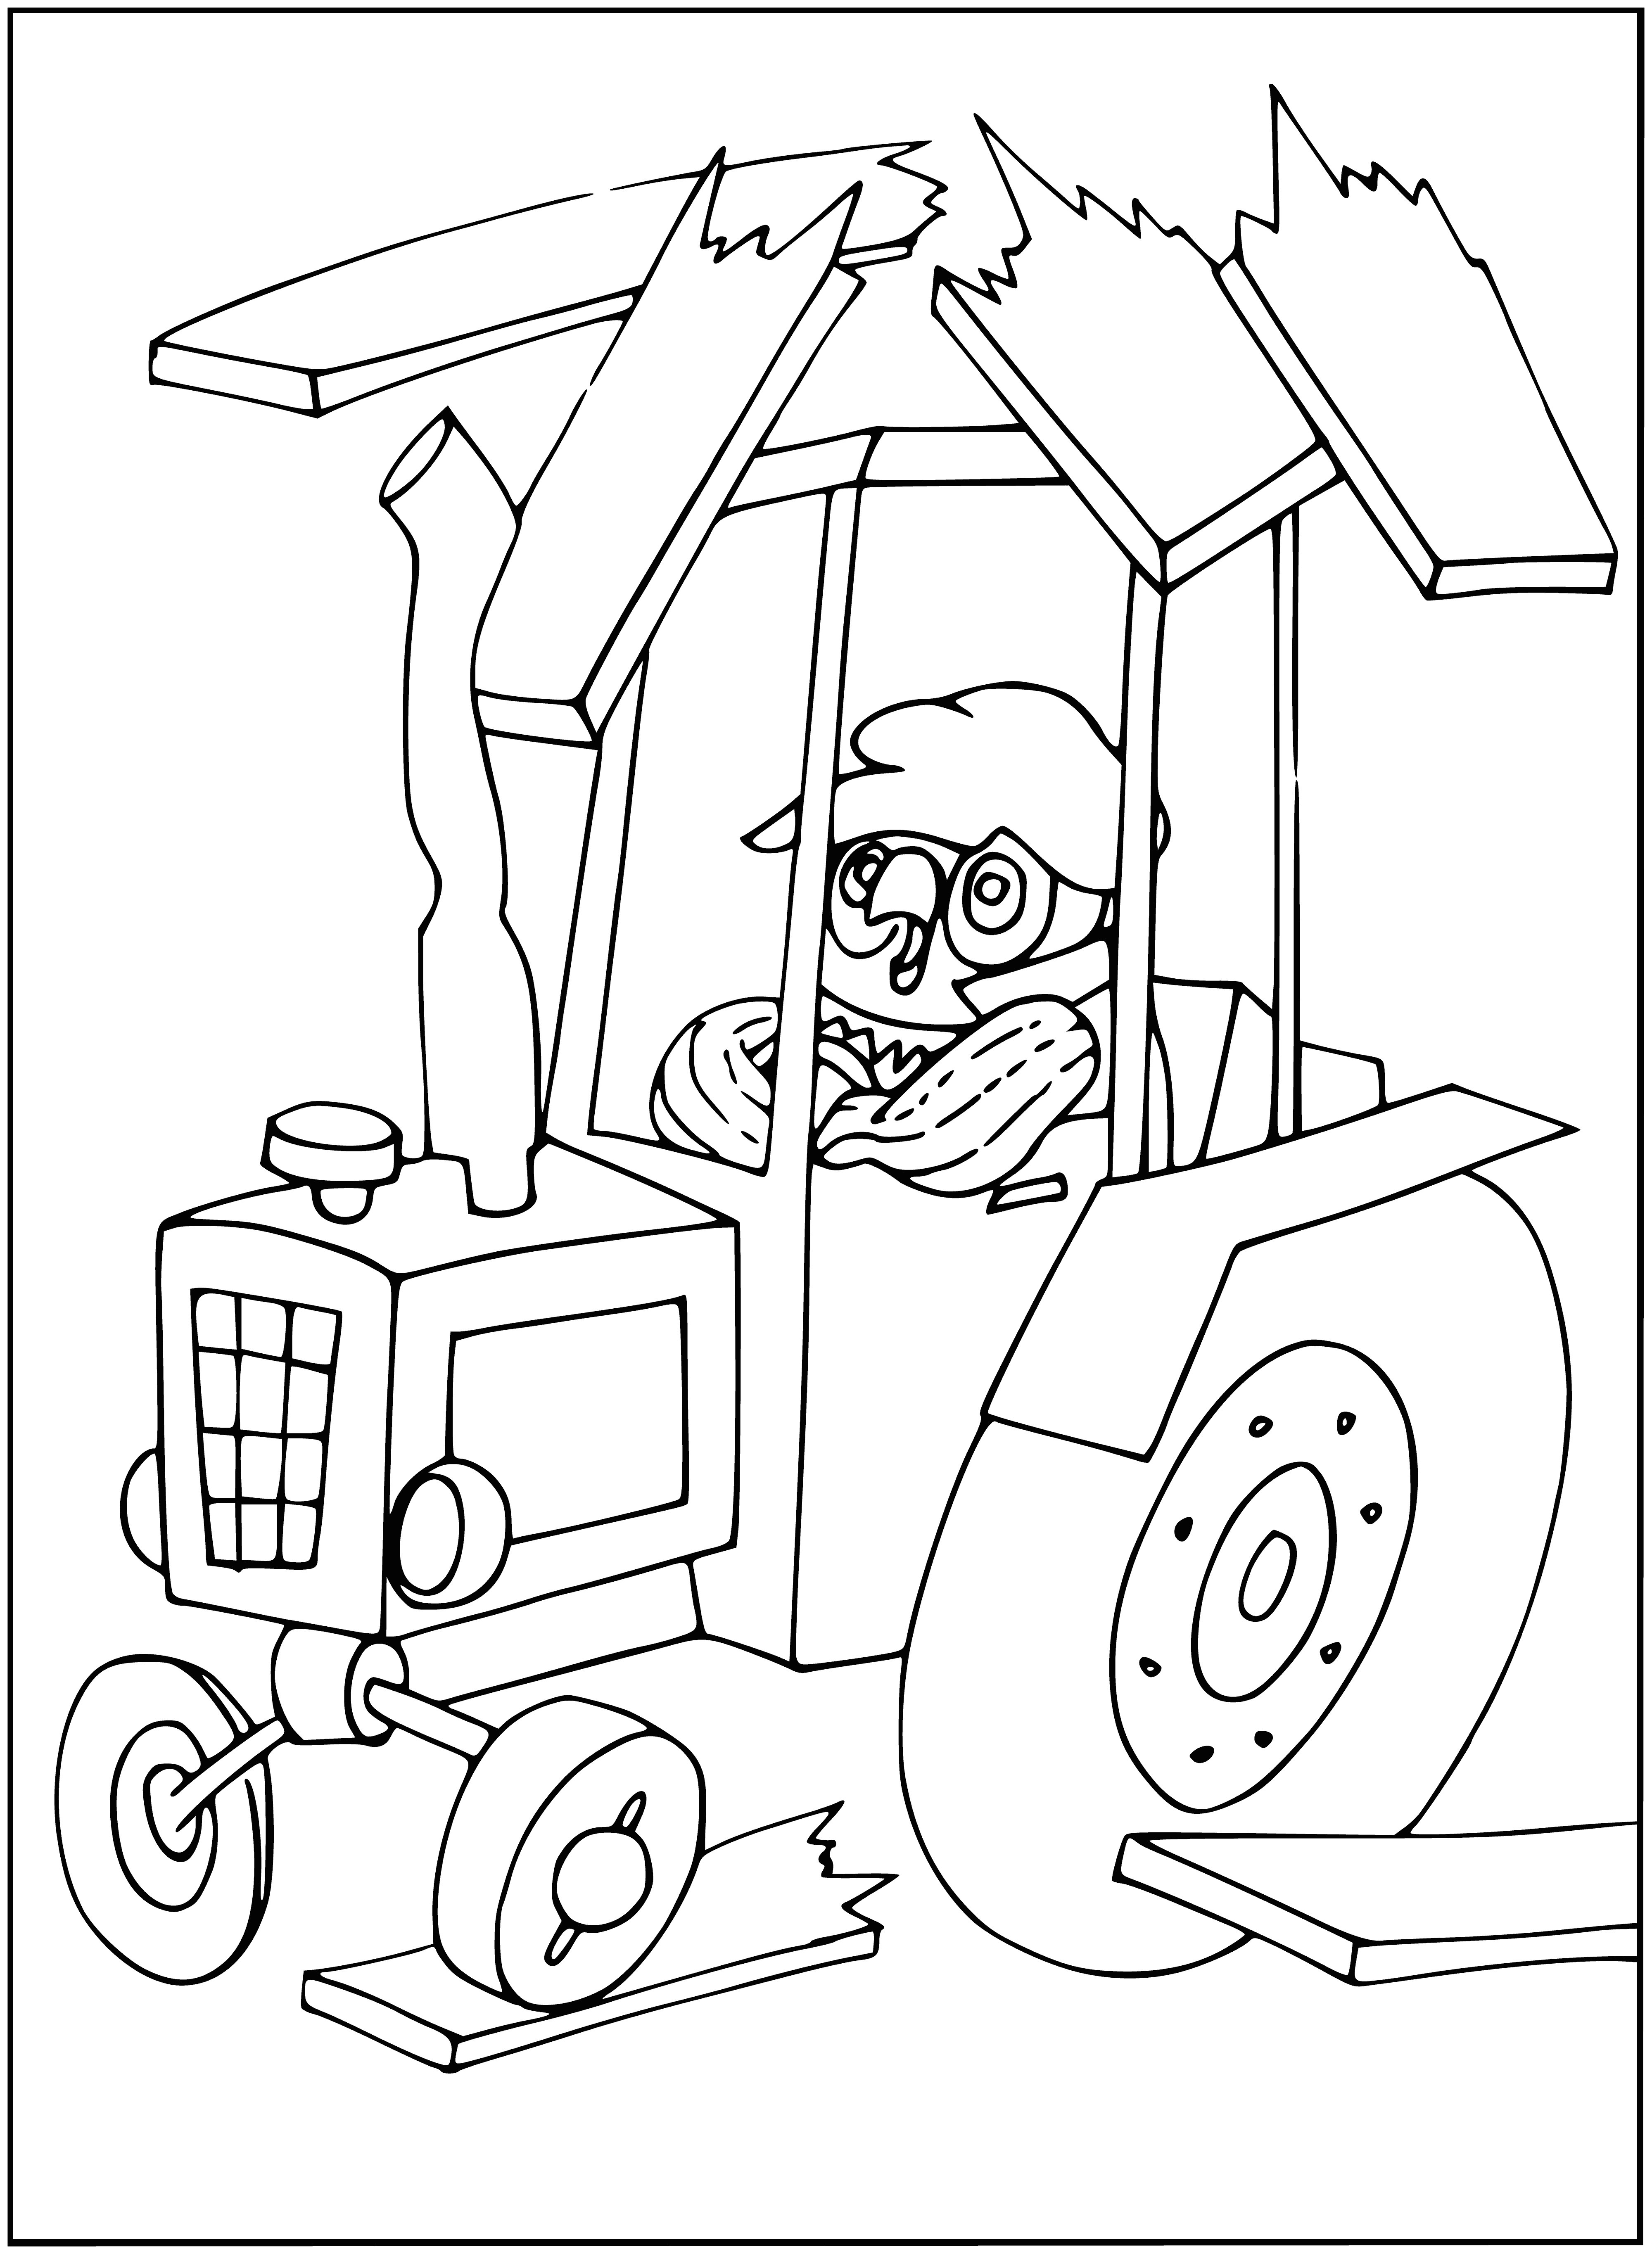 coloring page: Large tractor drives down dirt road w/ green fields, blue sky & clouds. It tows a red & white trailer w/ a yellow & green parrot holding a gold coin in its beak.